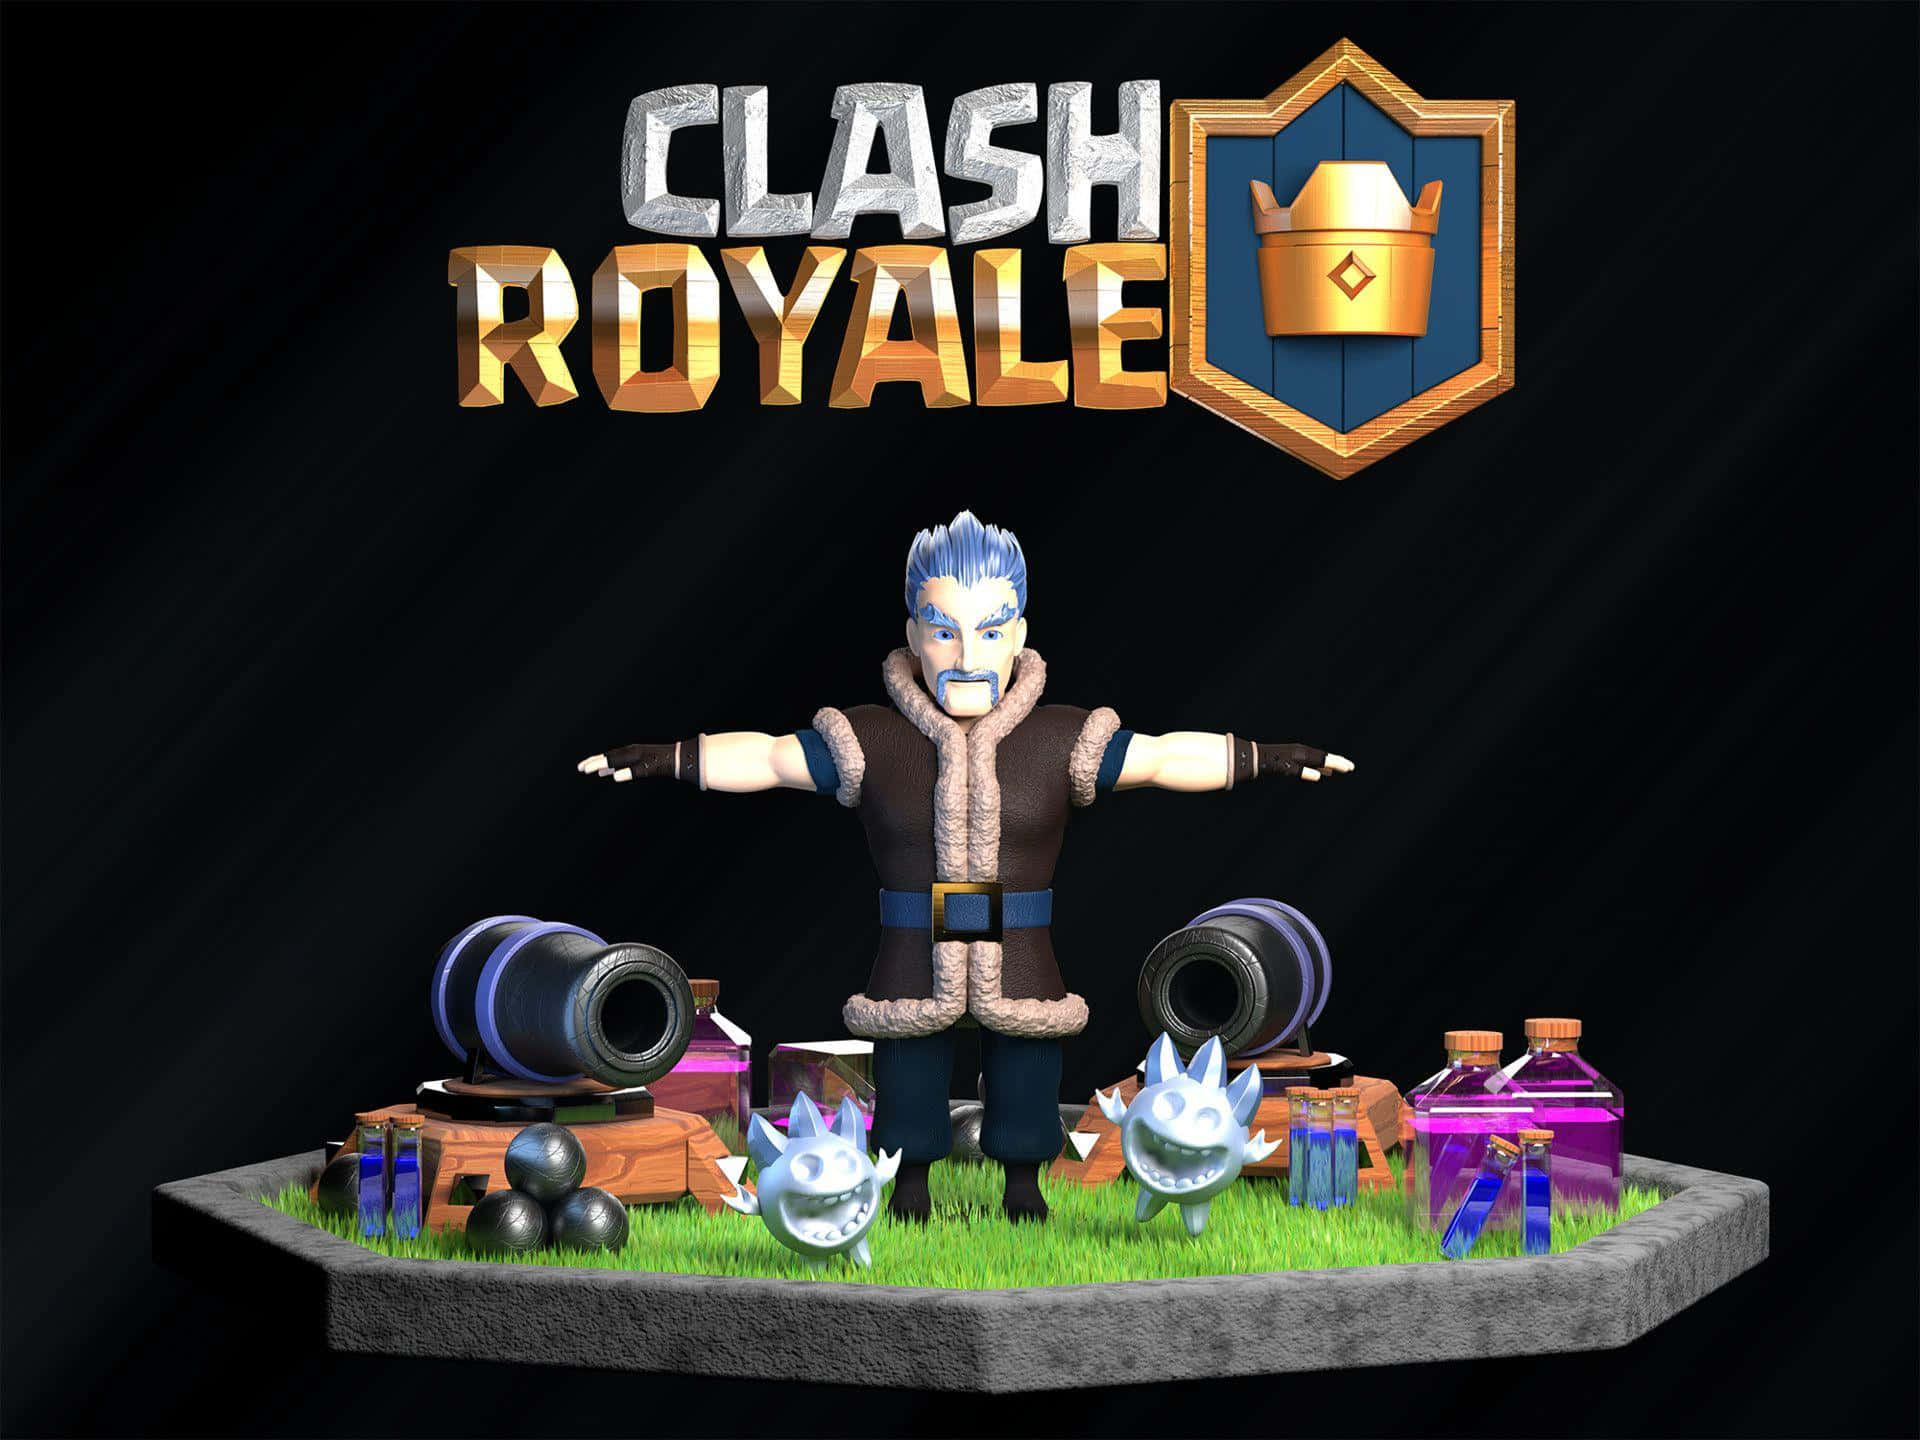 Take your battles to the next level with Clash Royale